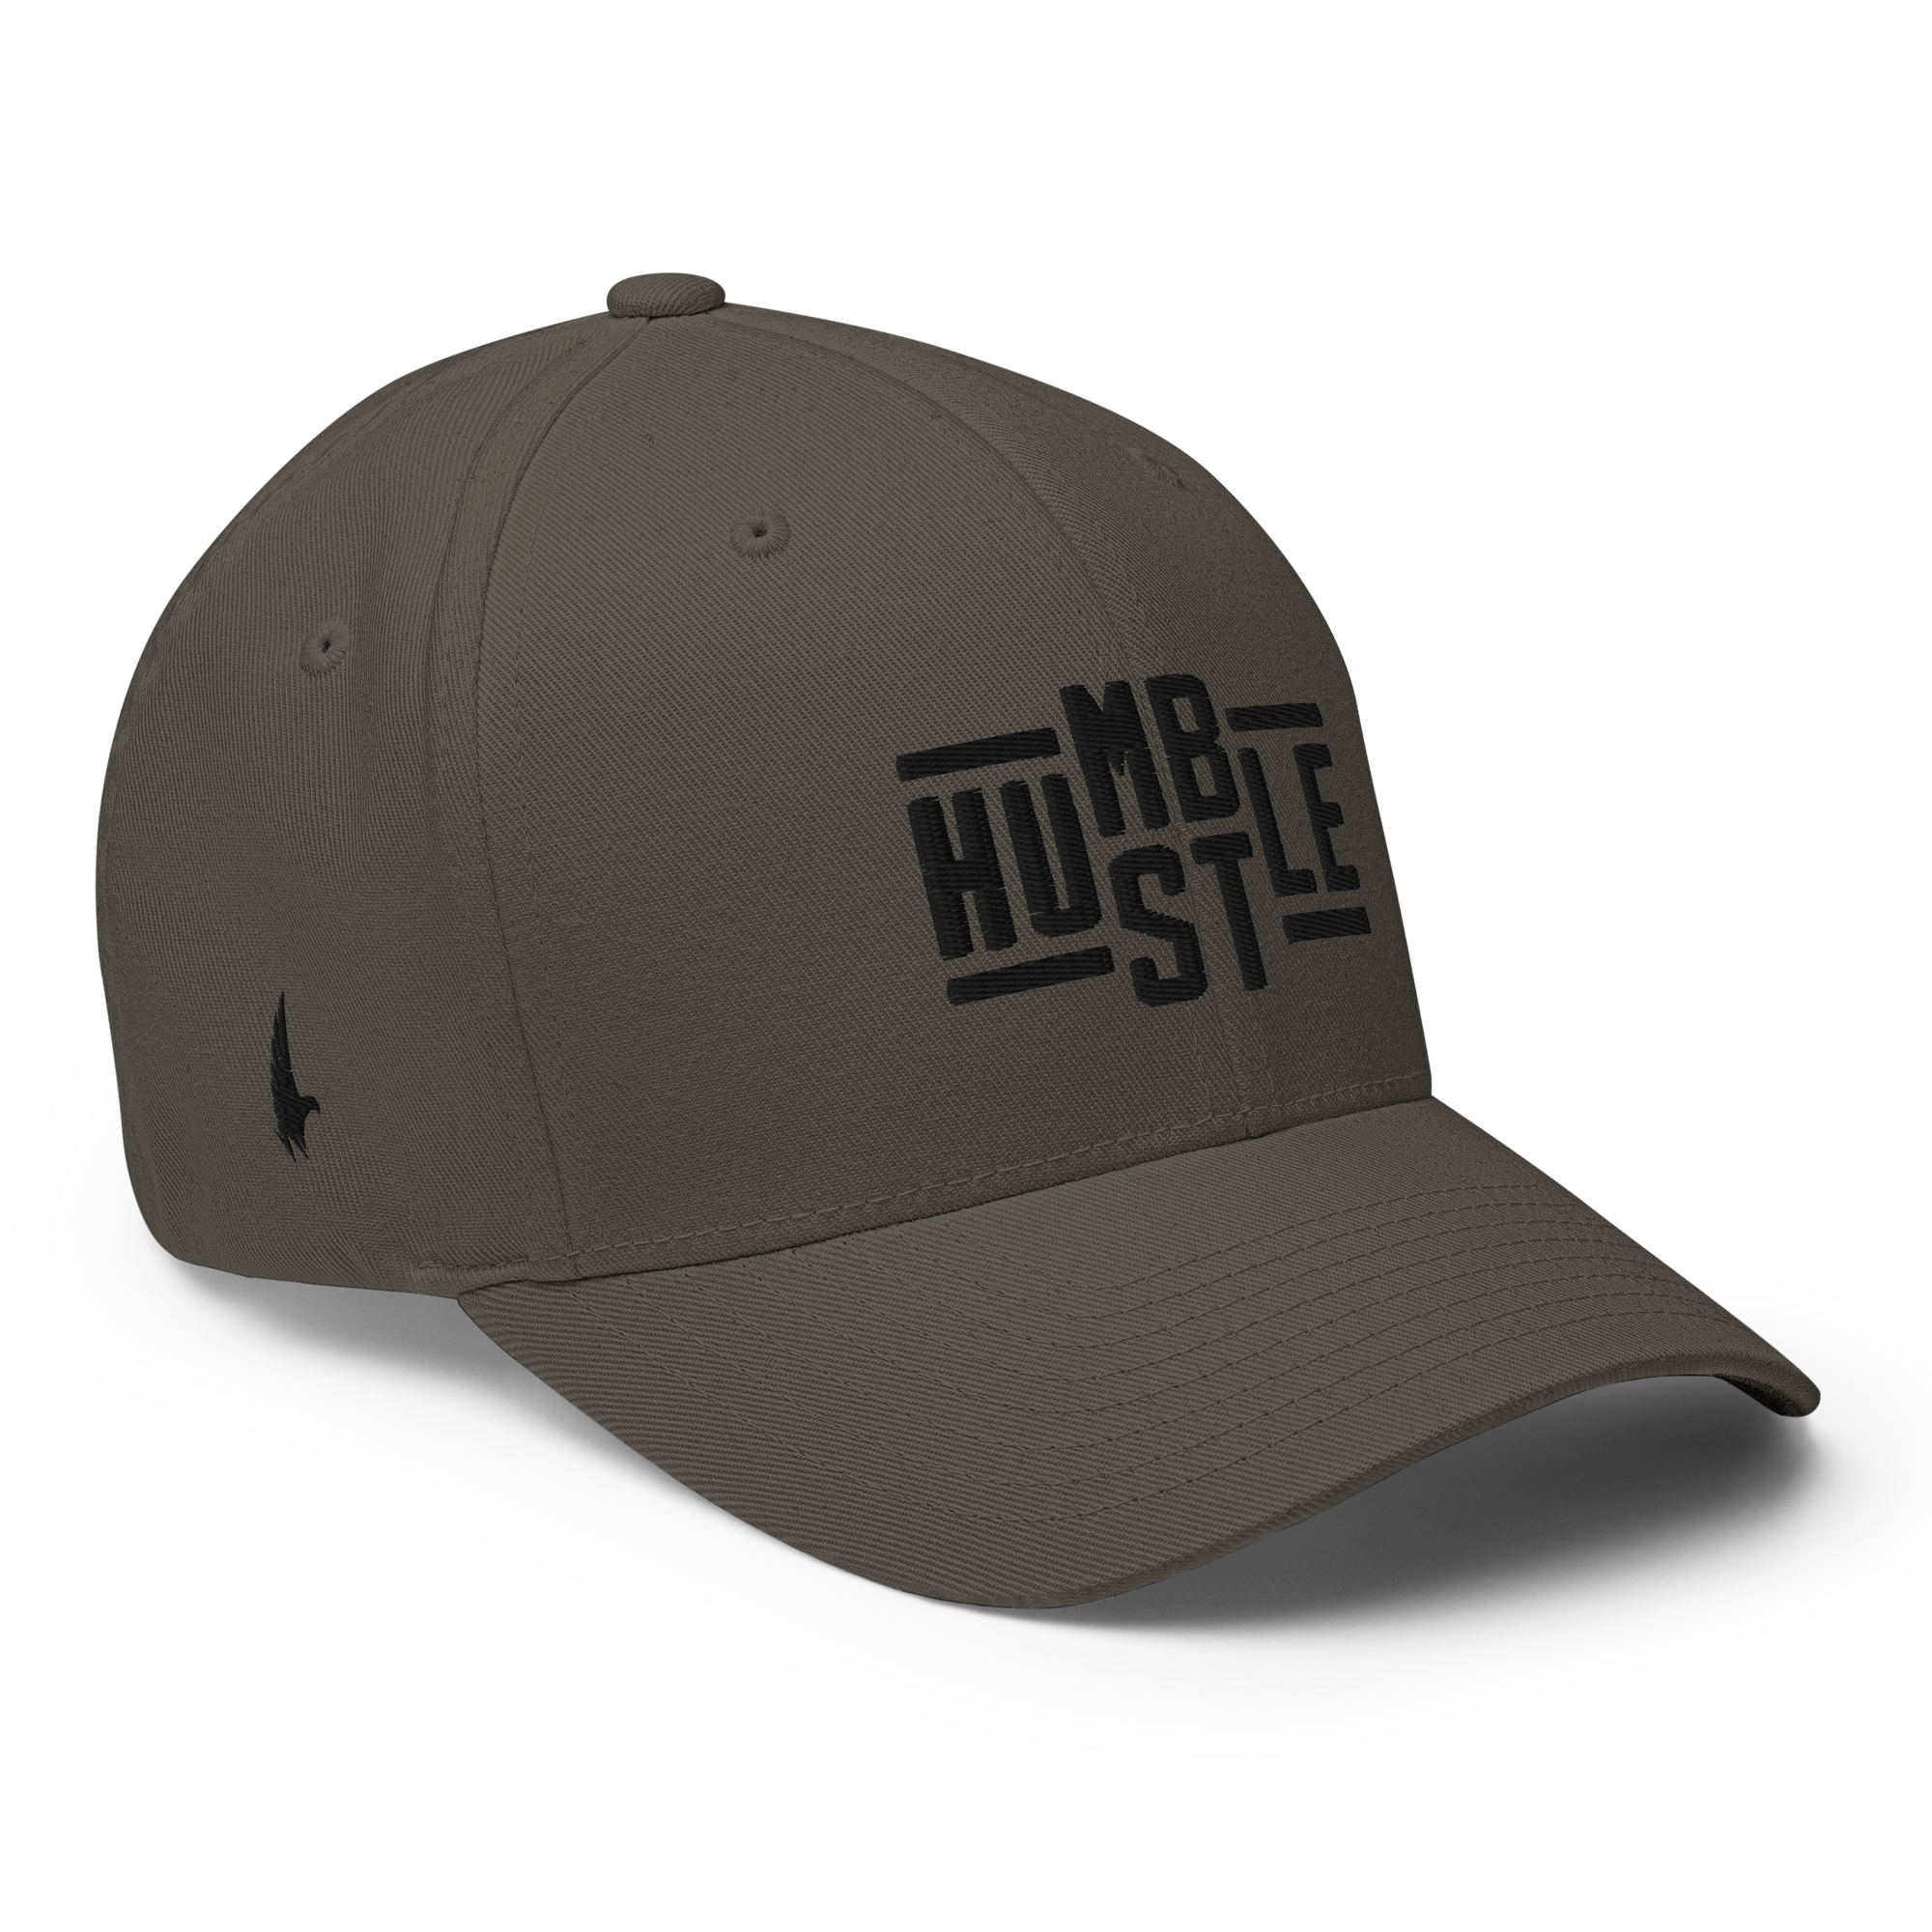 Loyalty Vibes Hustle Fitted Hat - Charcoal Gray / Black Fitted - Loyalty Vibes